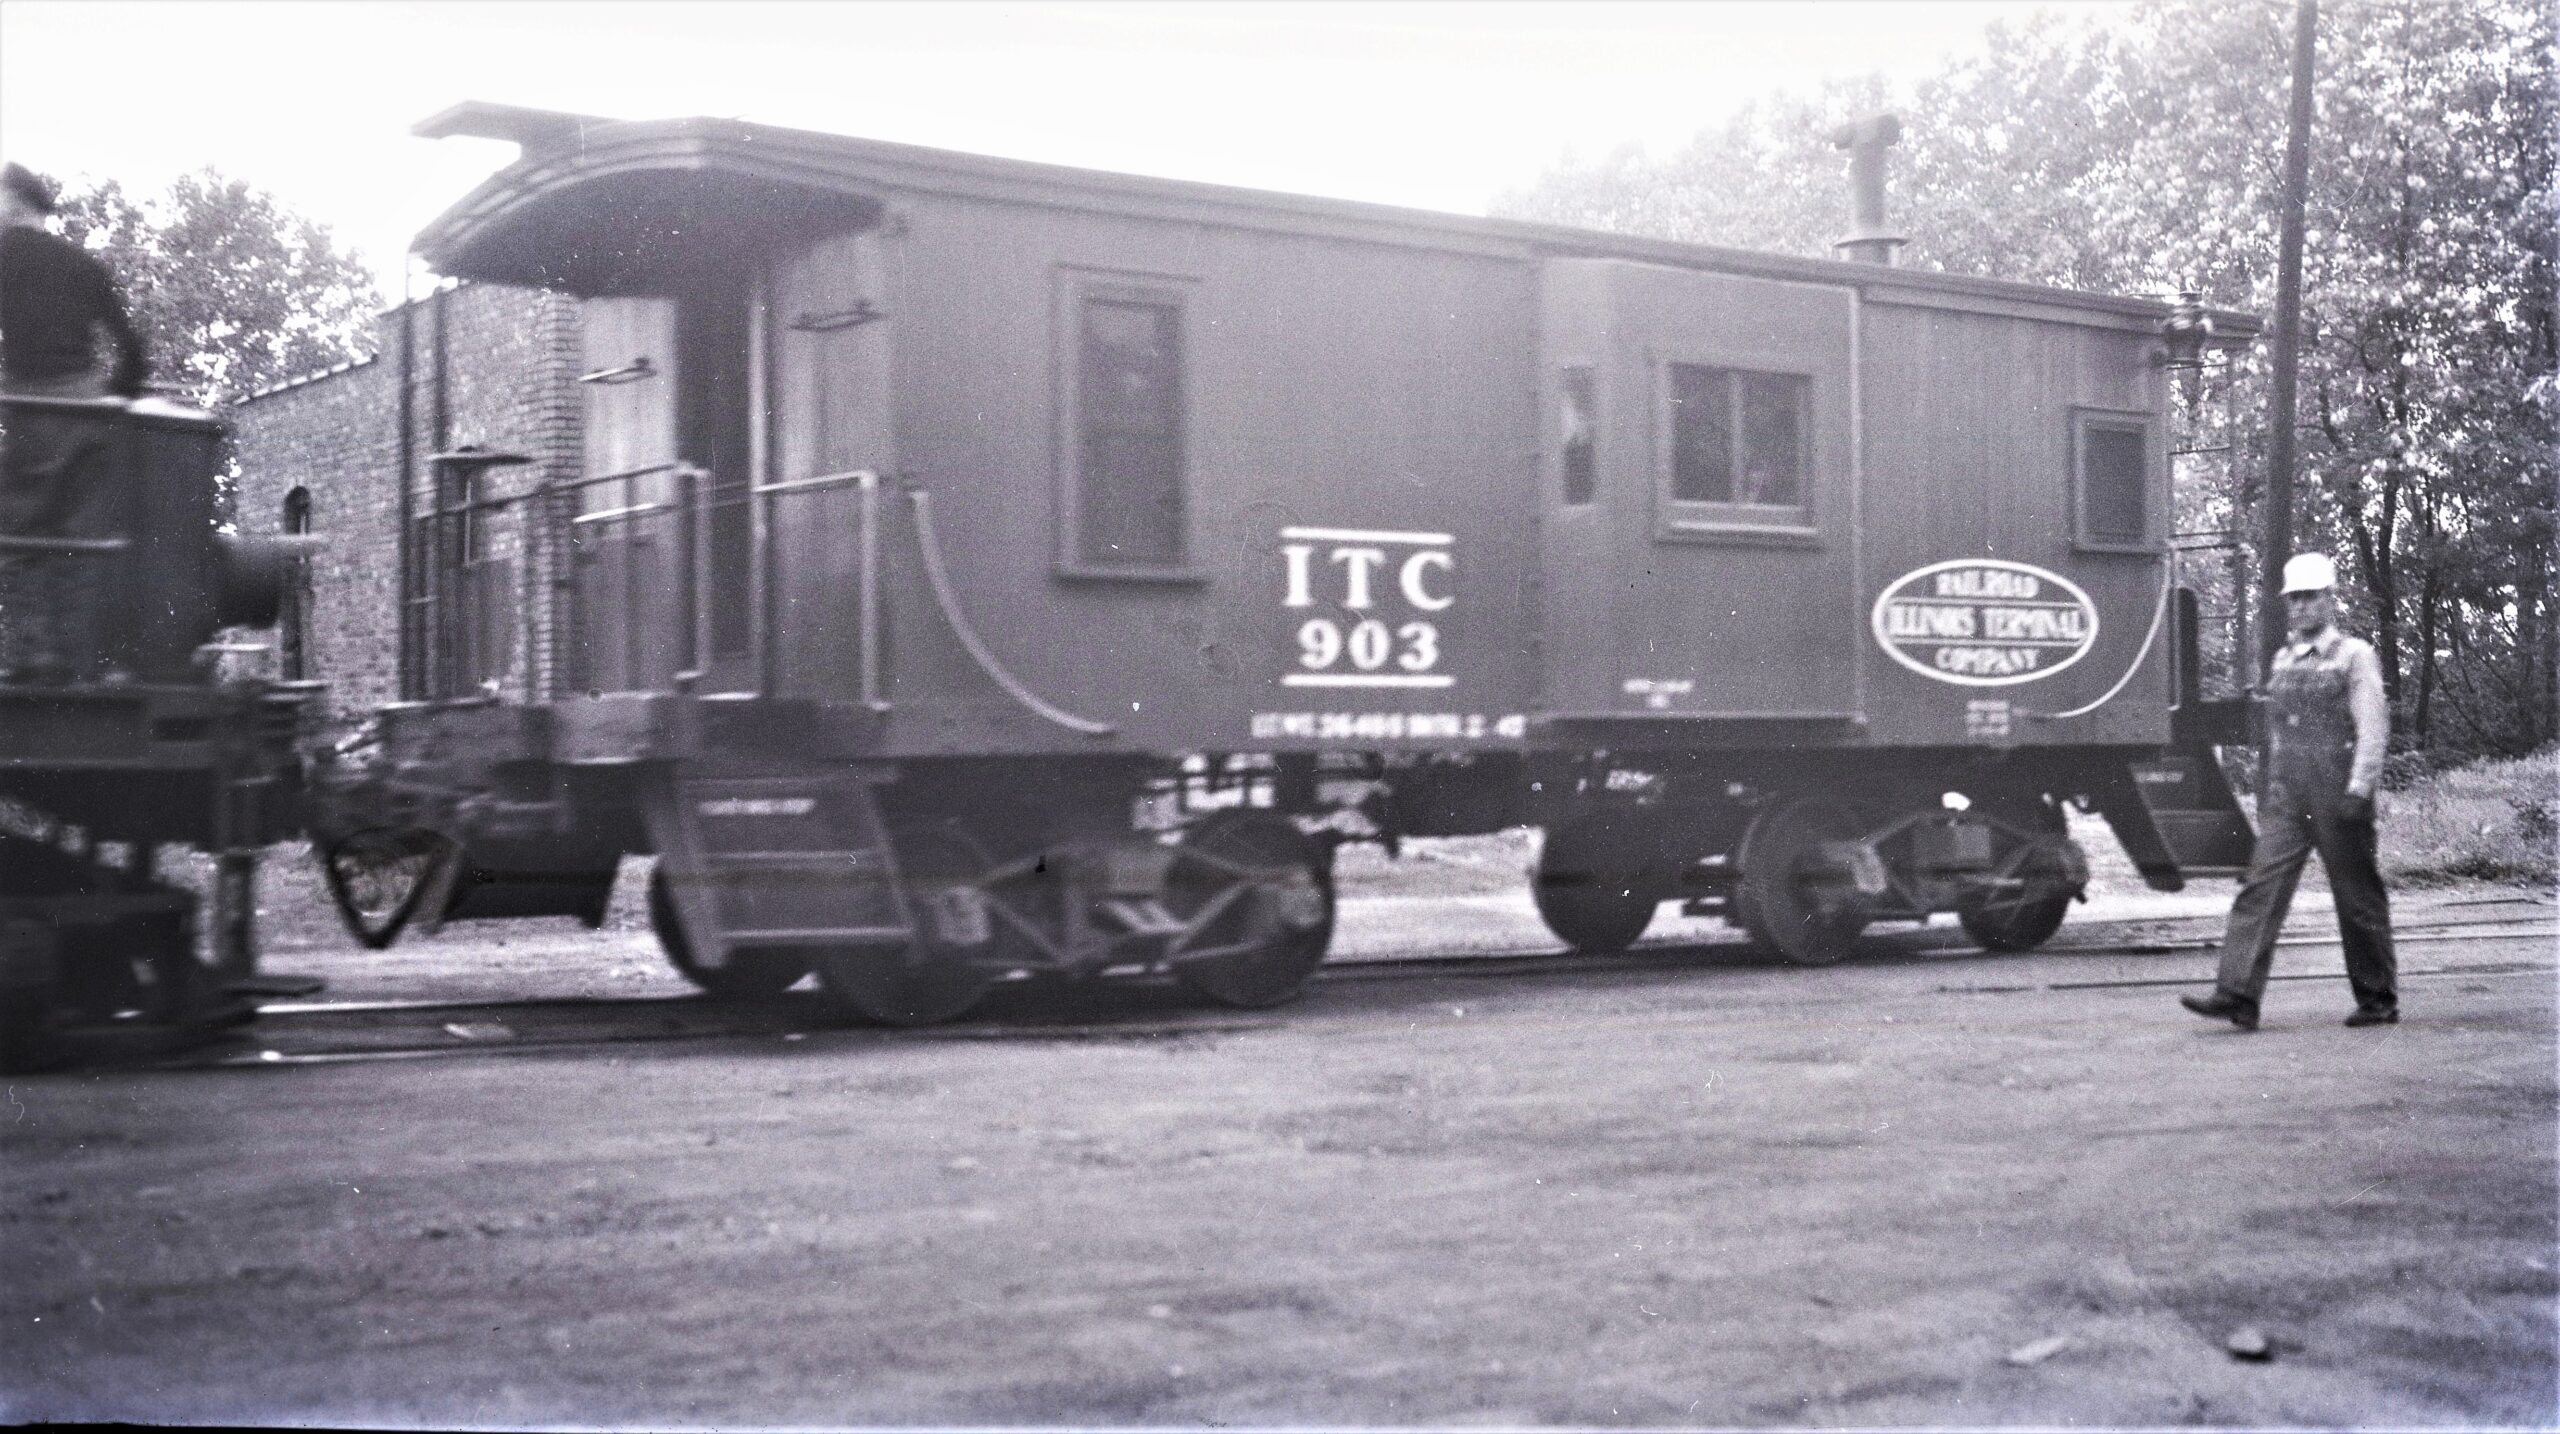 Illinois Terminal Railroad Company | Danville, Illinois | Caboose #903 | May 30, 1947 | Al Creamer photograph | North Jersey Chapter, NRHS Collection